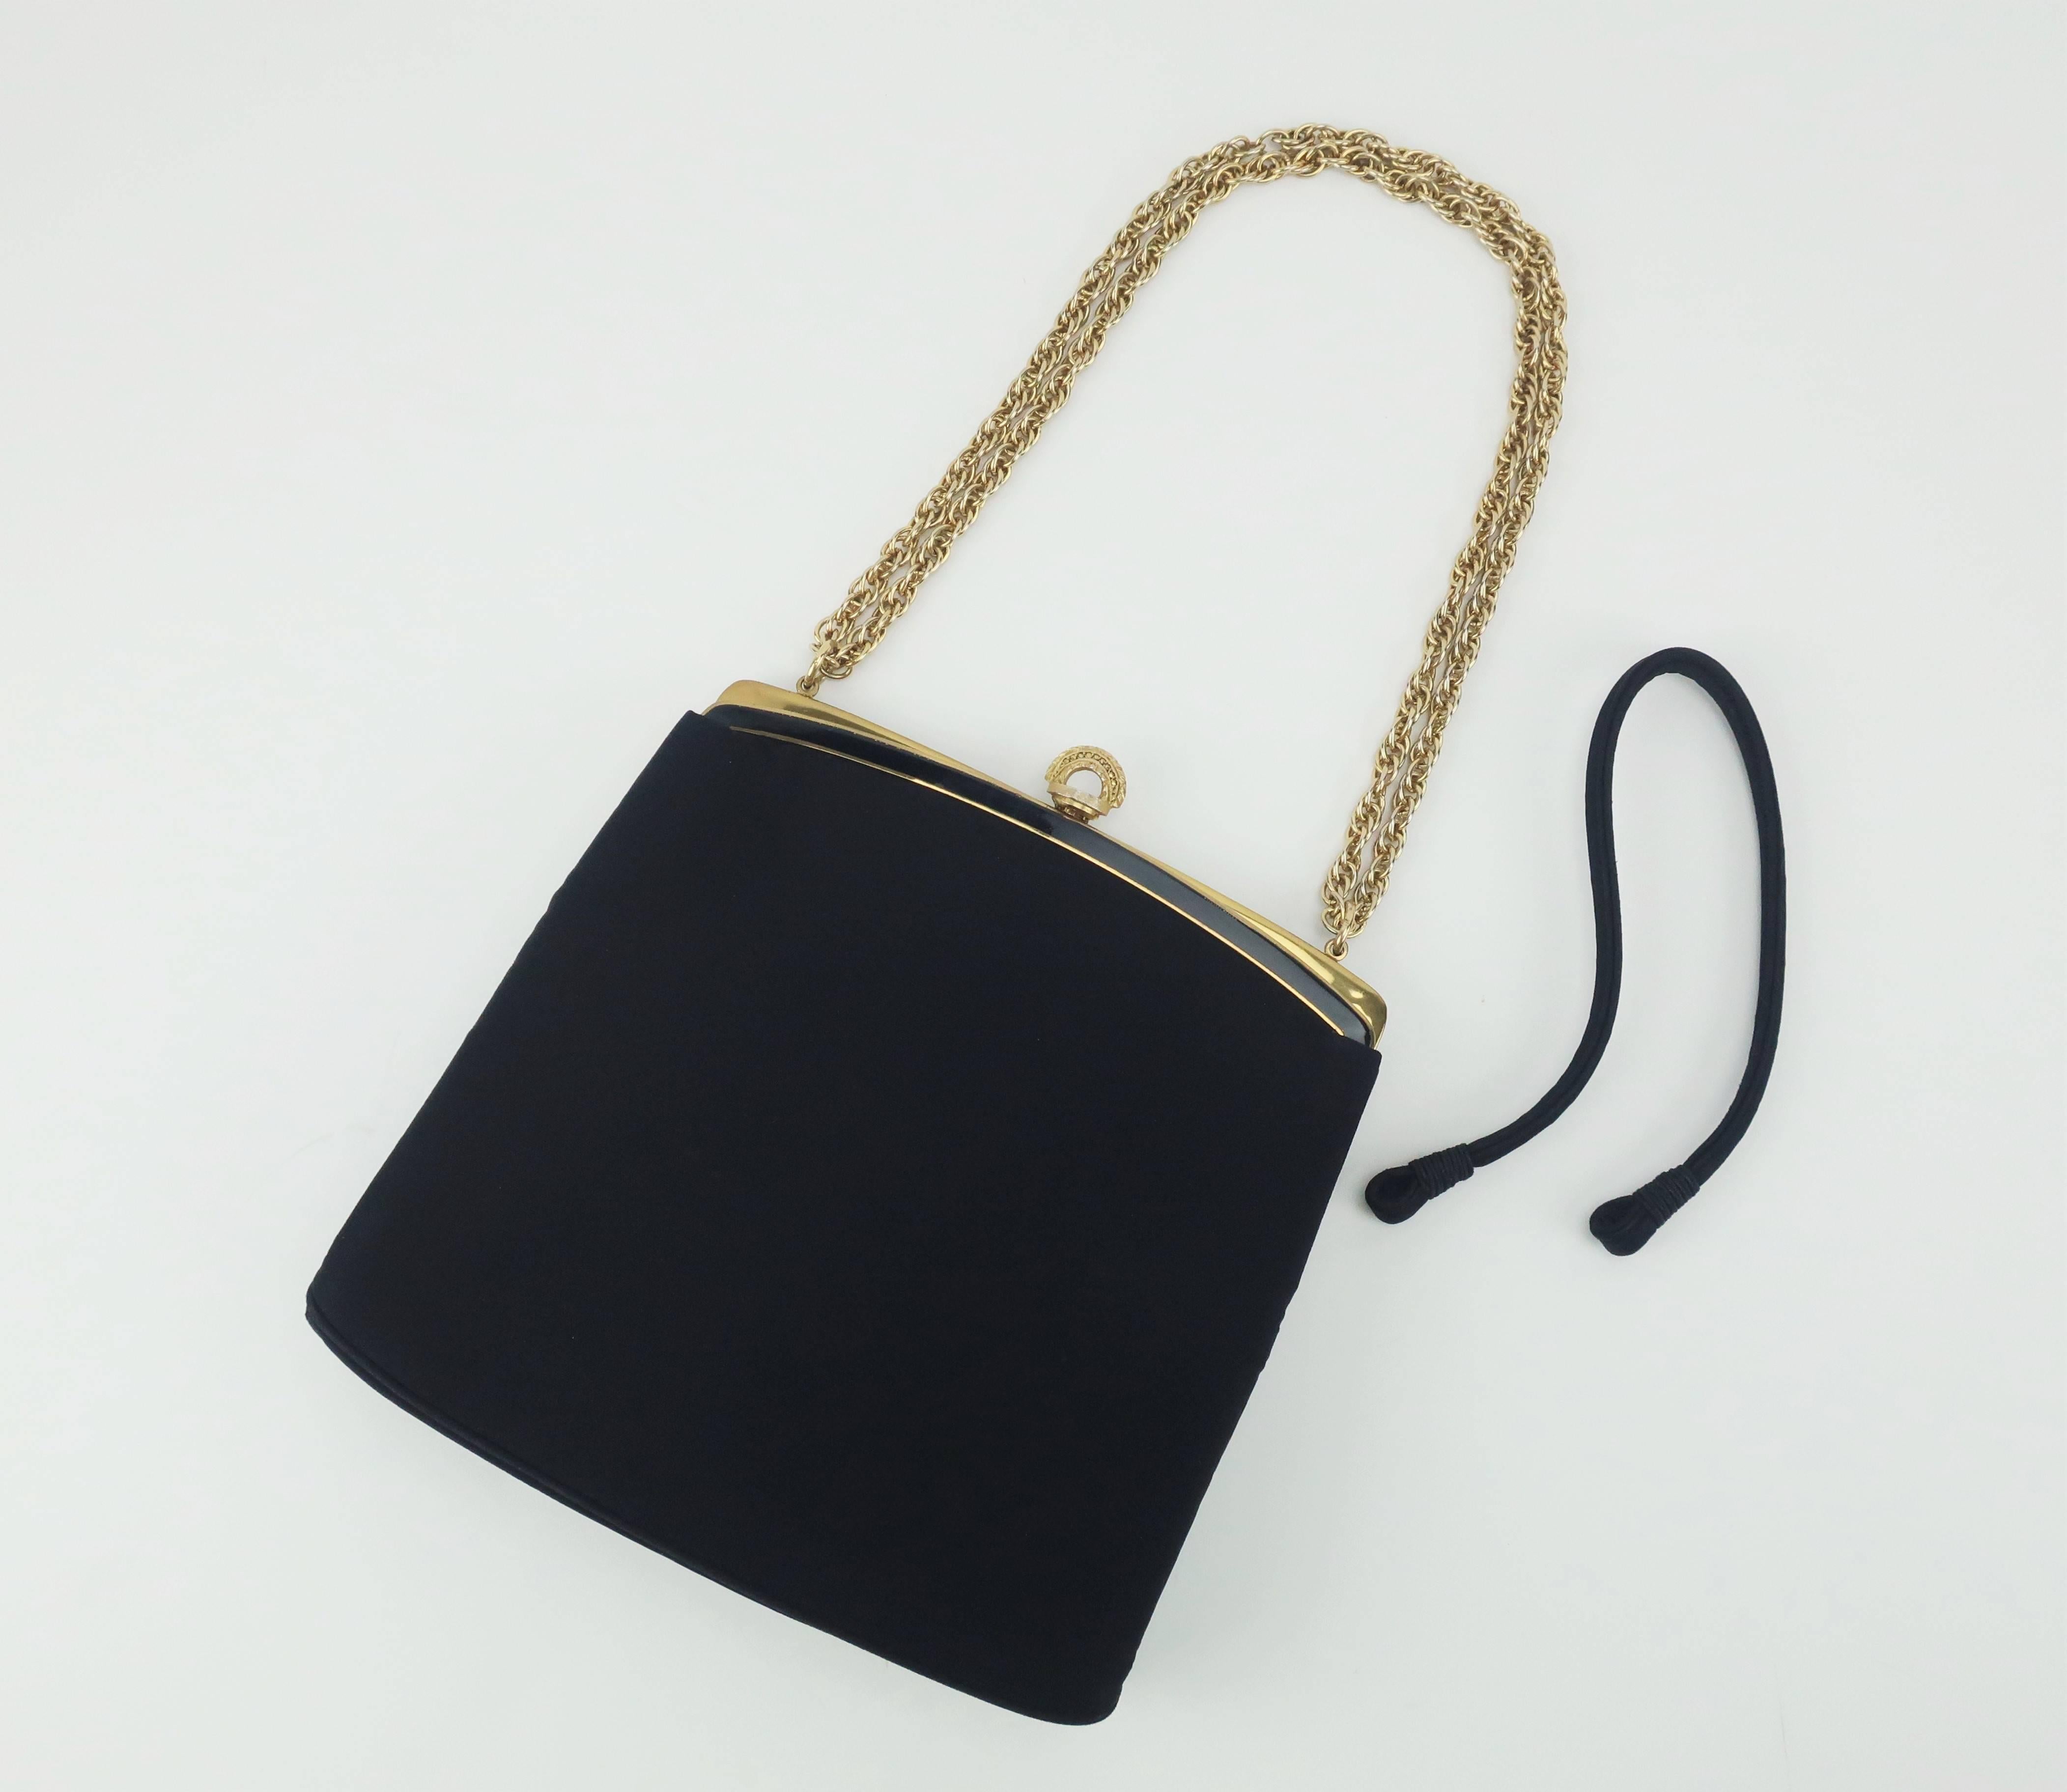 Harry Rosenfeld handbags were distinguished not only by their quality and style but also by their unique decorative features.  This understated C.1960 black faille evening handbag is a lovely example of how classic craftsmanship is perfect in any